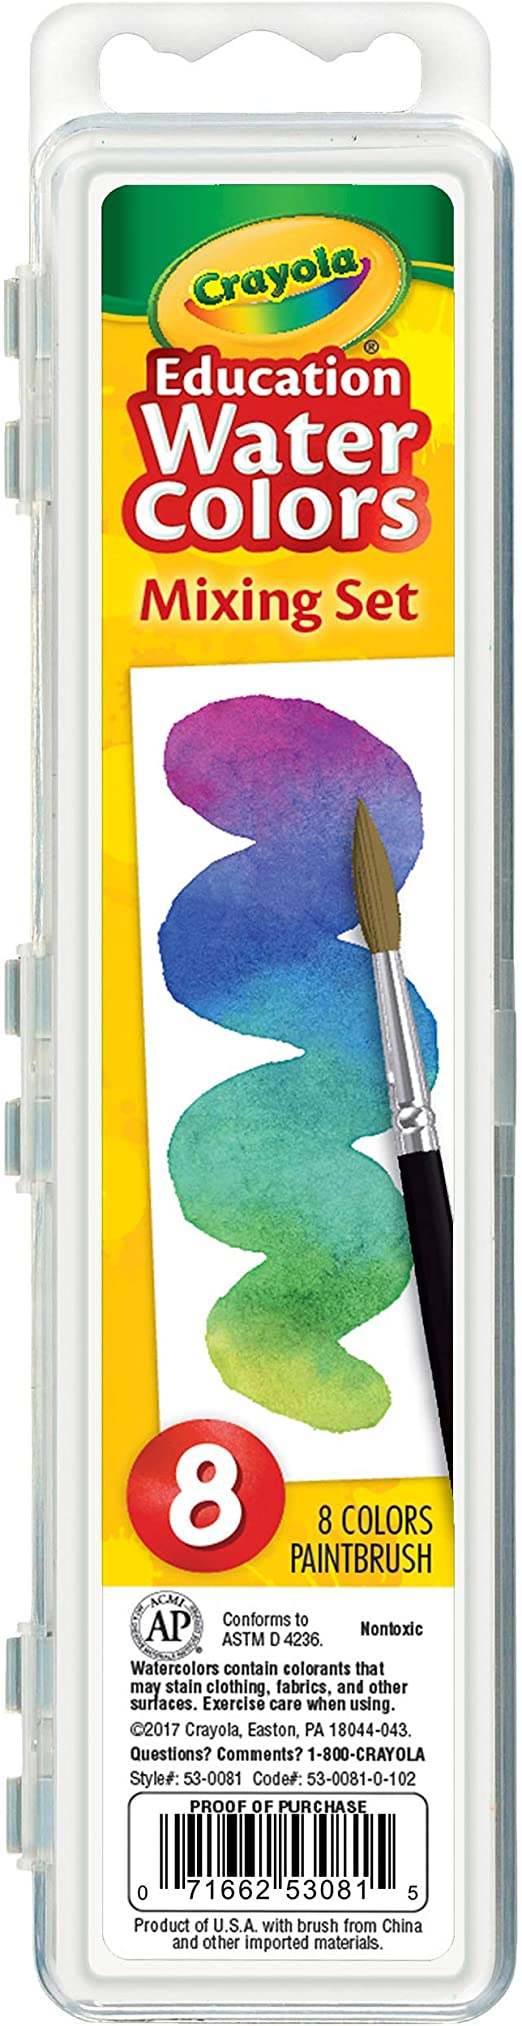 Crayola Watercolor Mixing Set with Taklon Paint Brush, 8 Paint Colors (53-0081)